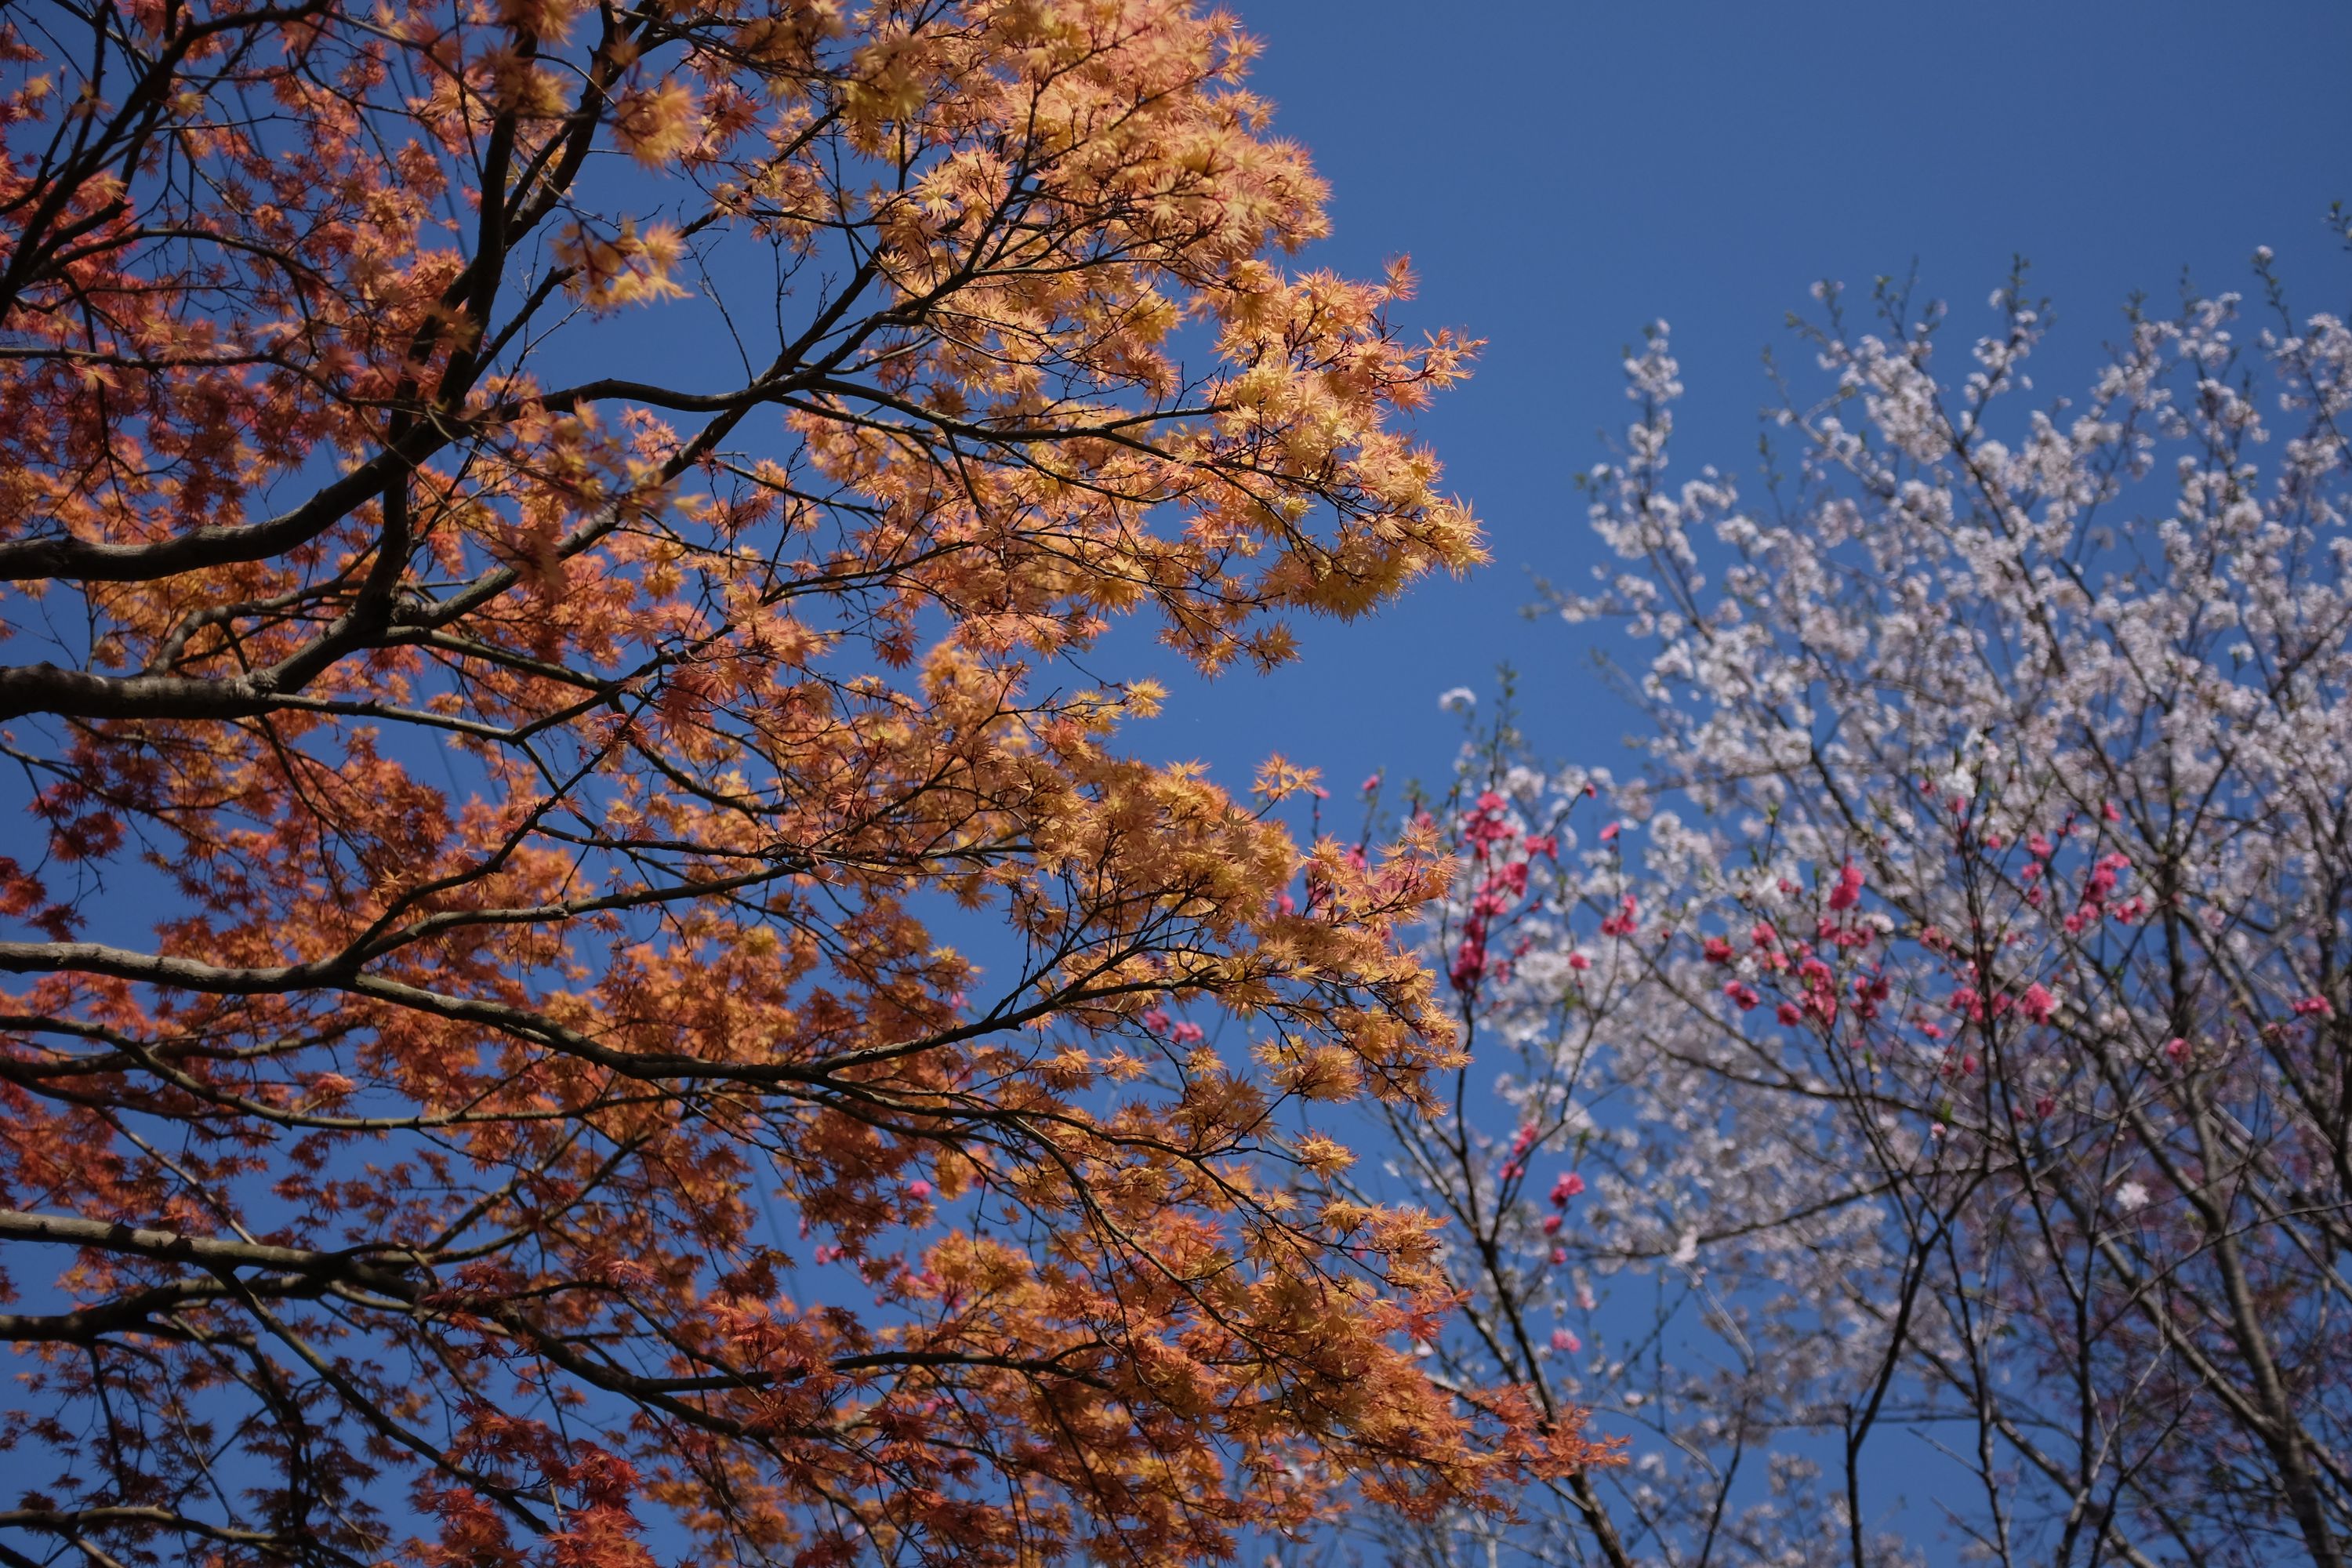 Looking up at trees blooming in various colors against a blue sky.